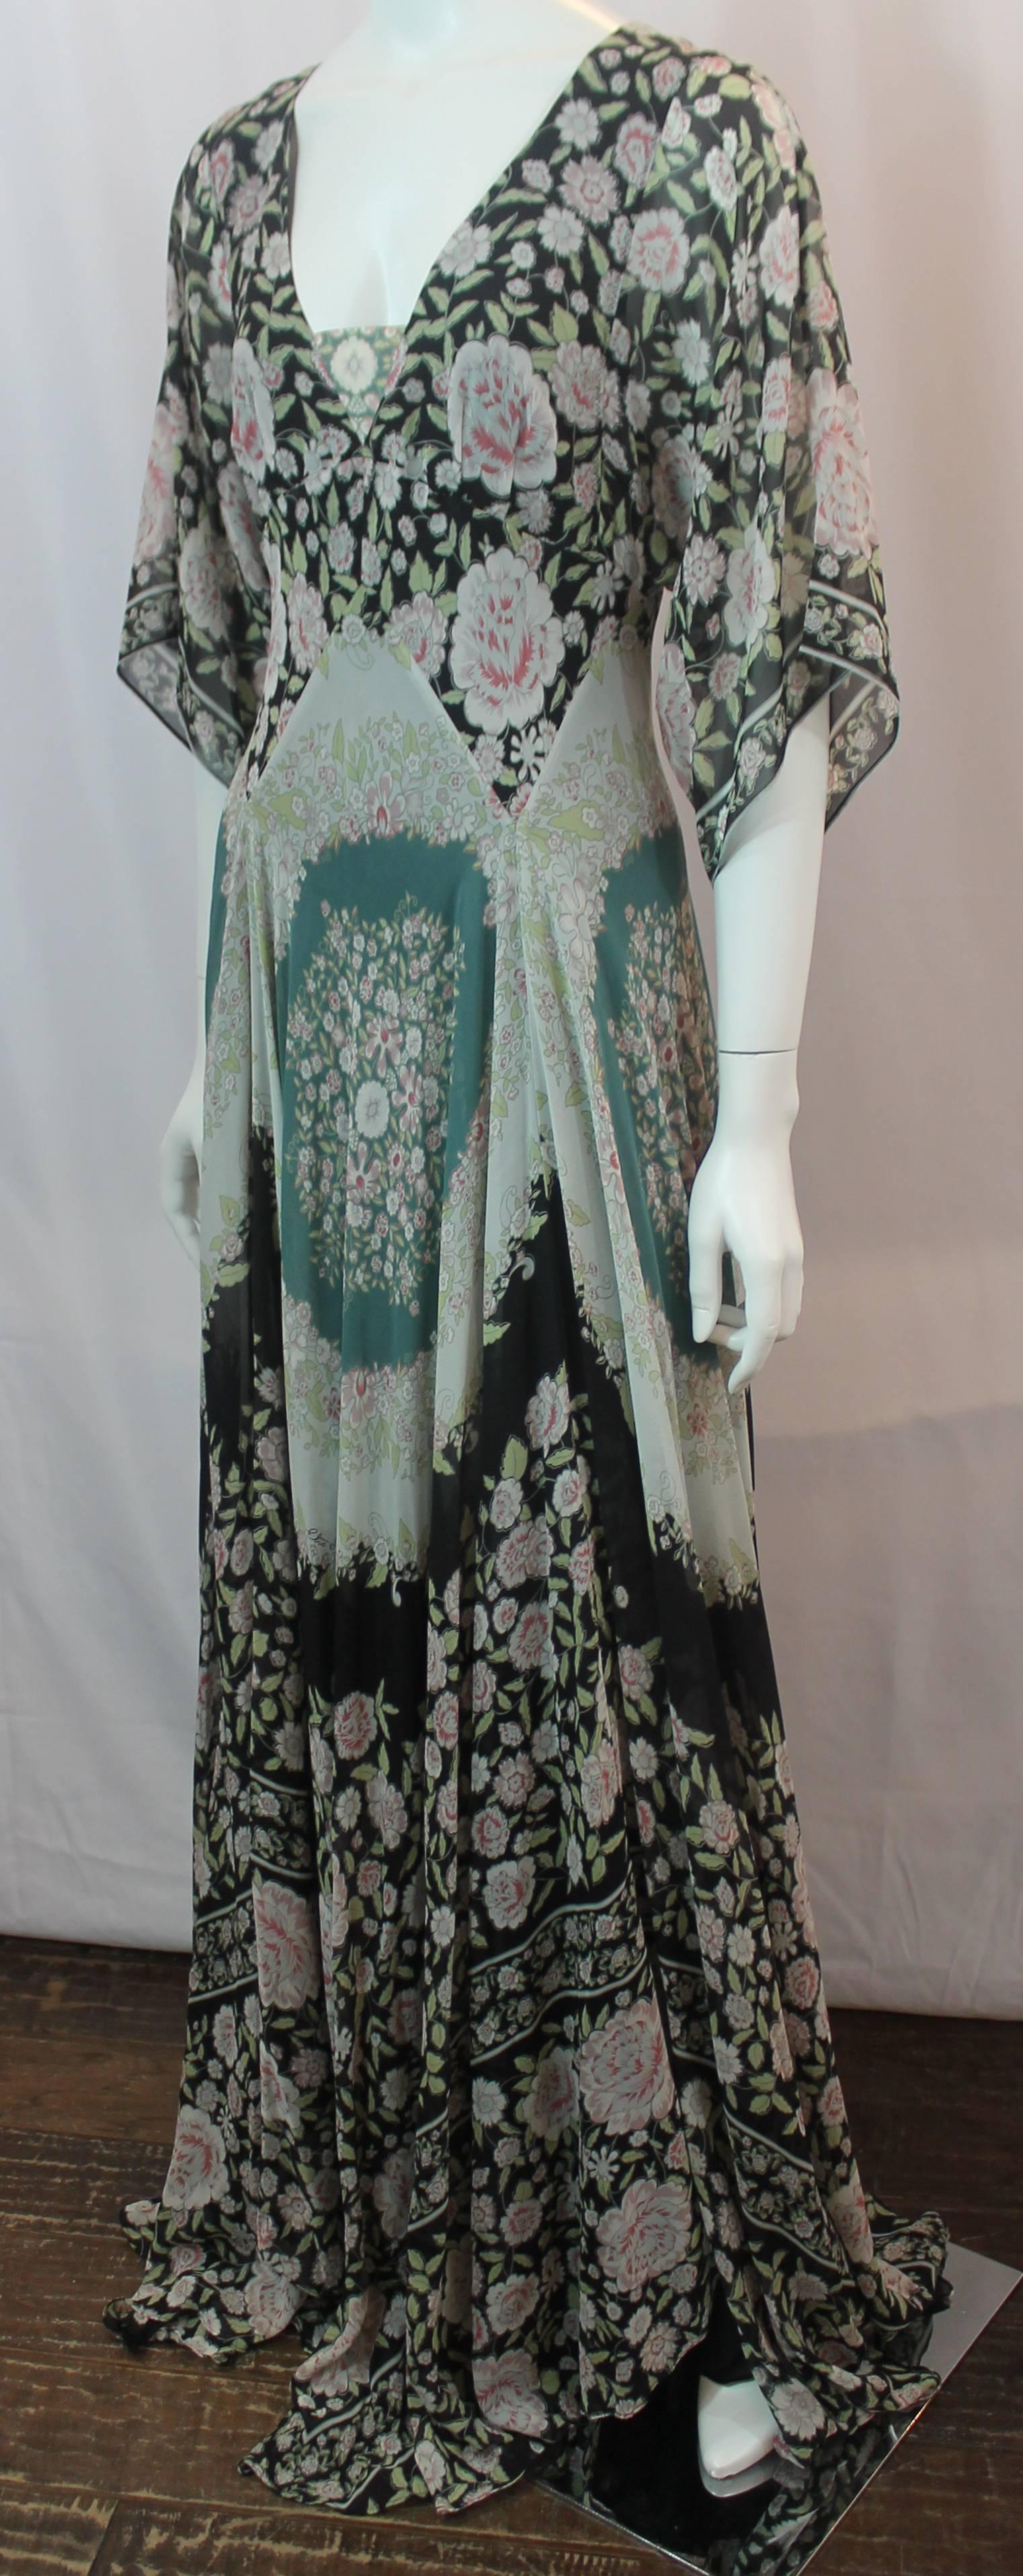 Etro Multi-Color Printed Silk Chiffon Peasant Style Gown - 44. This gown can double as a maxi dress and is floral printed with different colors such as black, light pink, and green. It has a peasant style and has elbow length sleeves, a back zipper,